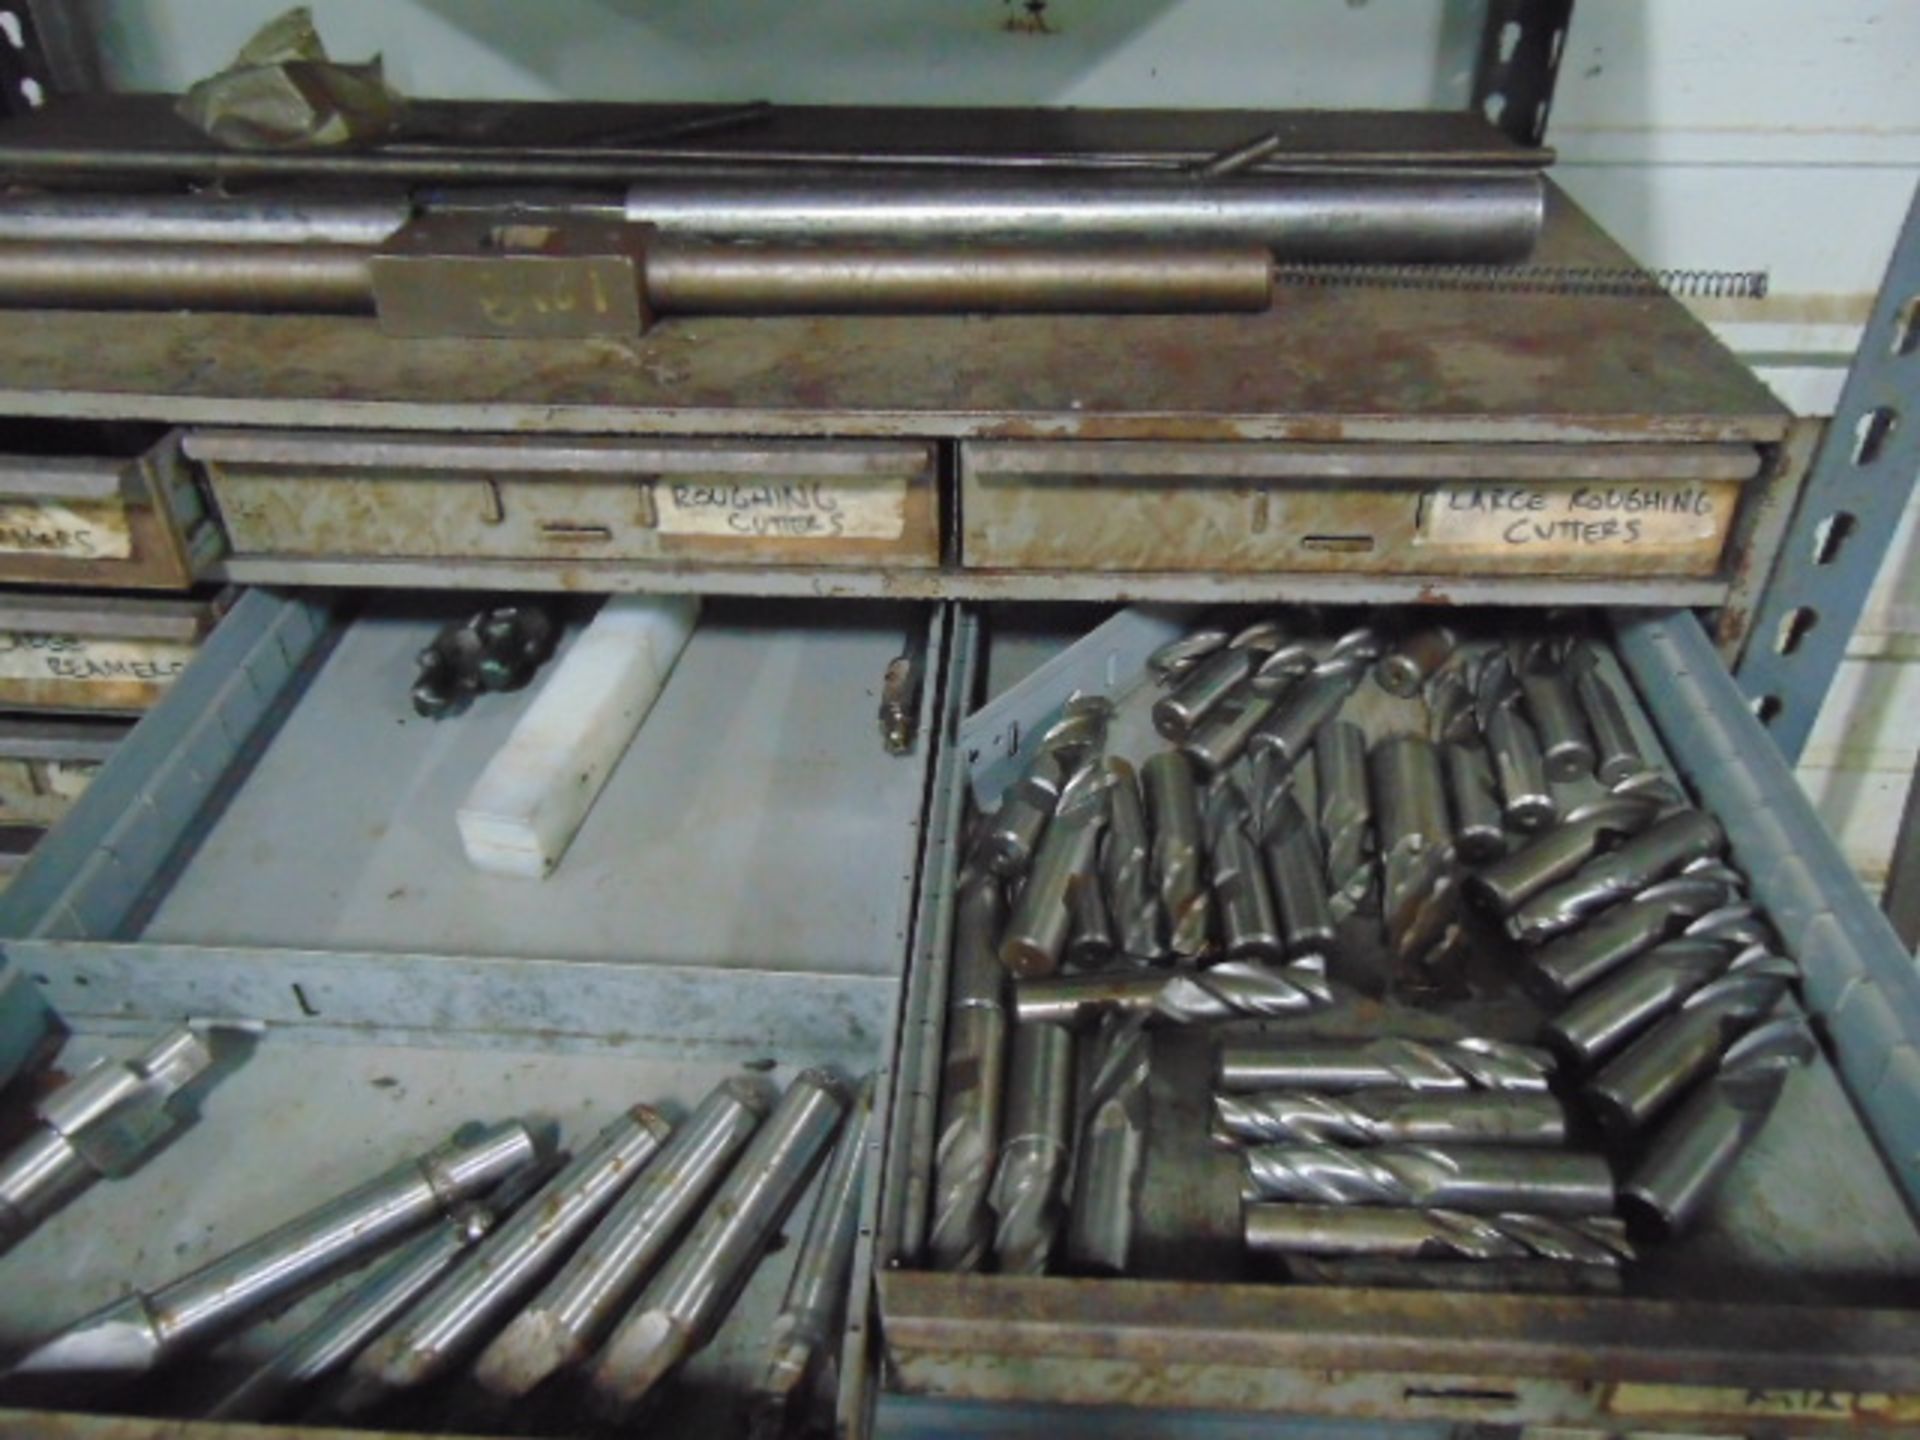 LOT CONSISTING OF: assorted reamers, counterbores & endmills, w/(2) cabinets - Image 7 of 7